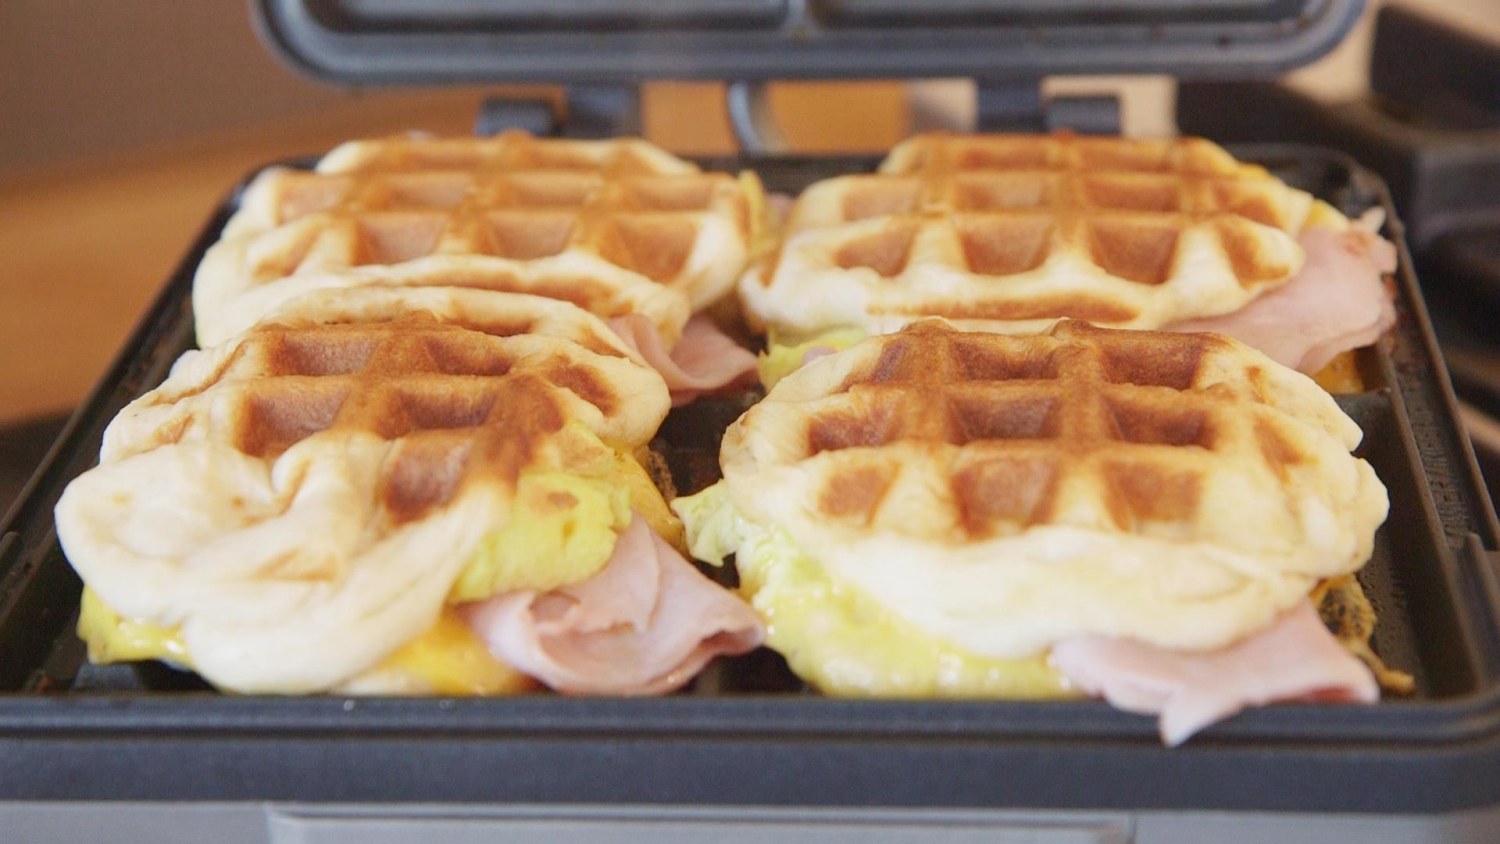 Create 'restaurant quality' stuffed waffles with this easy-to